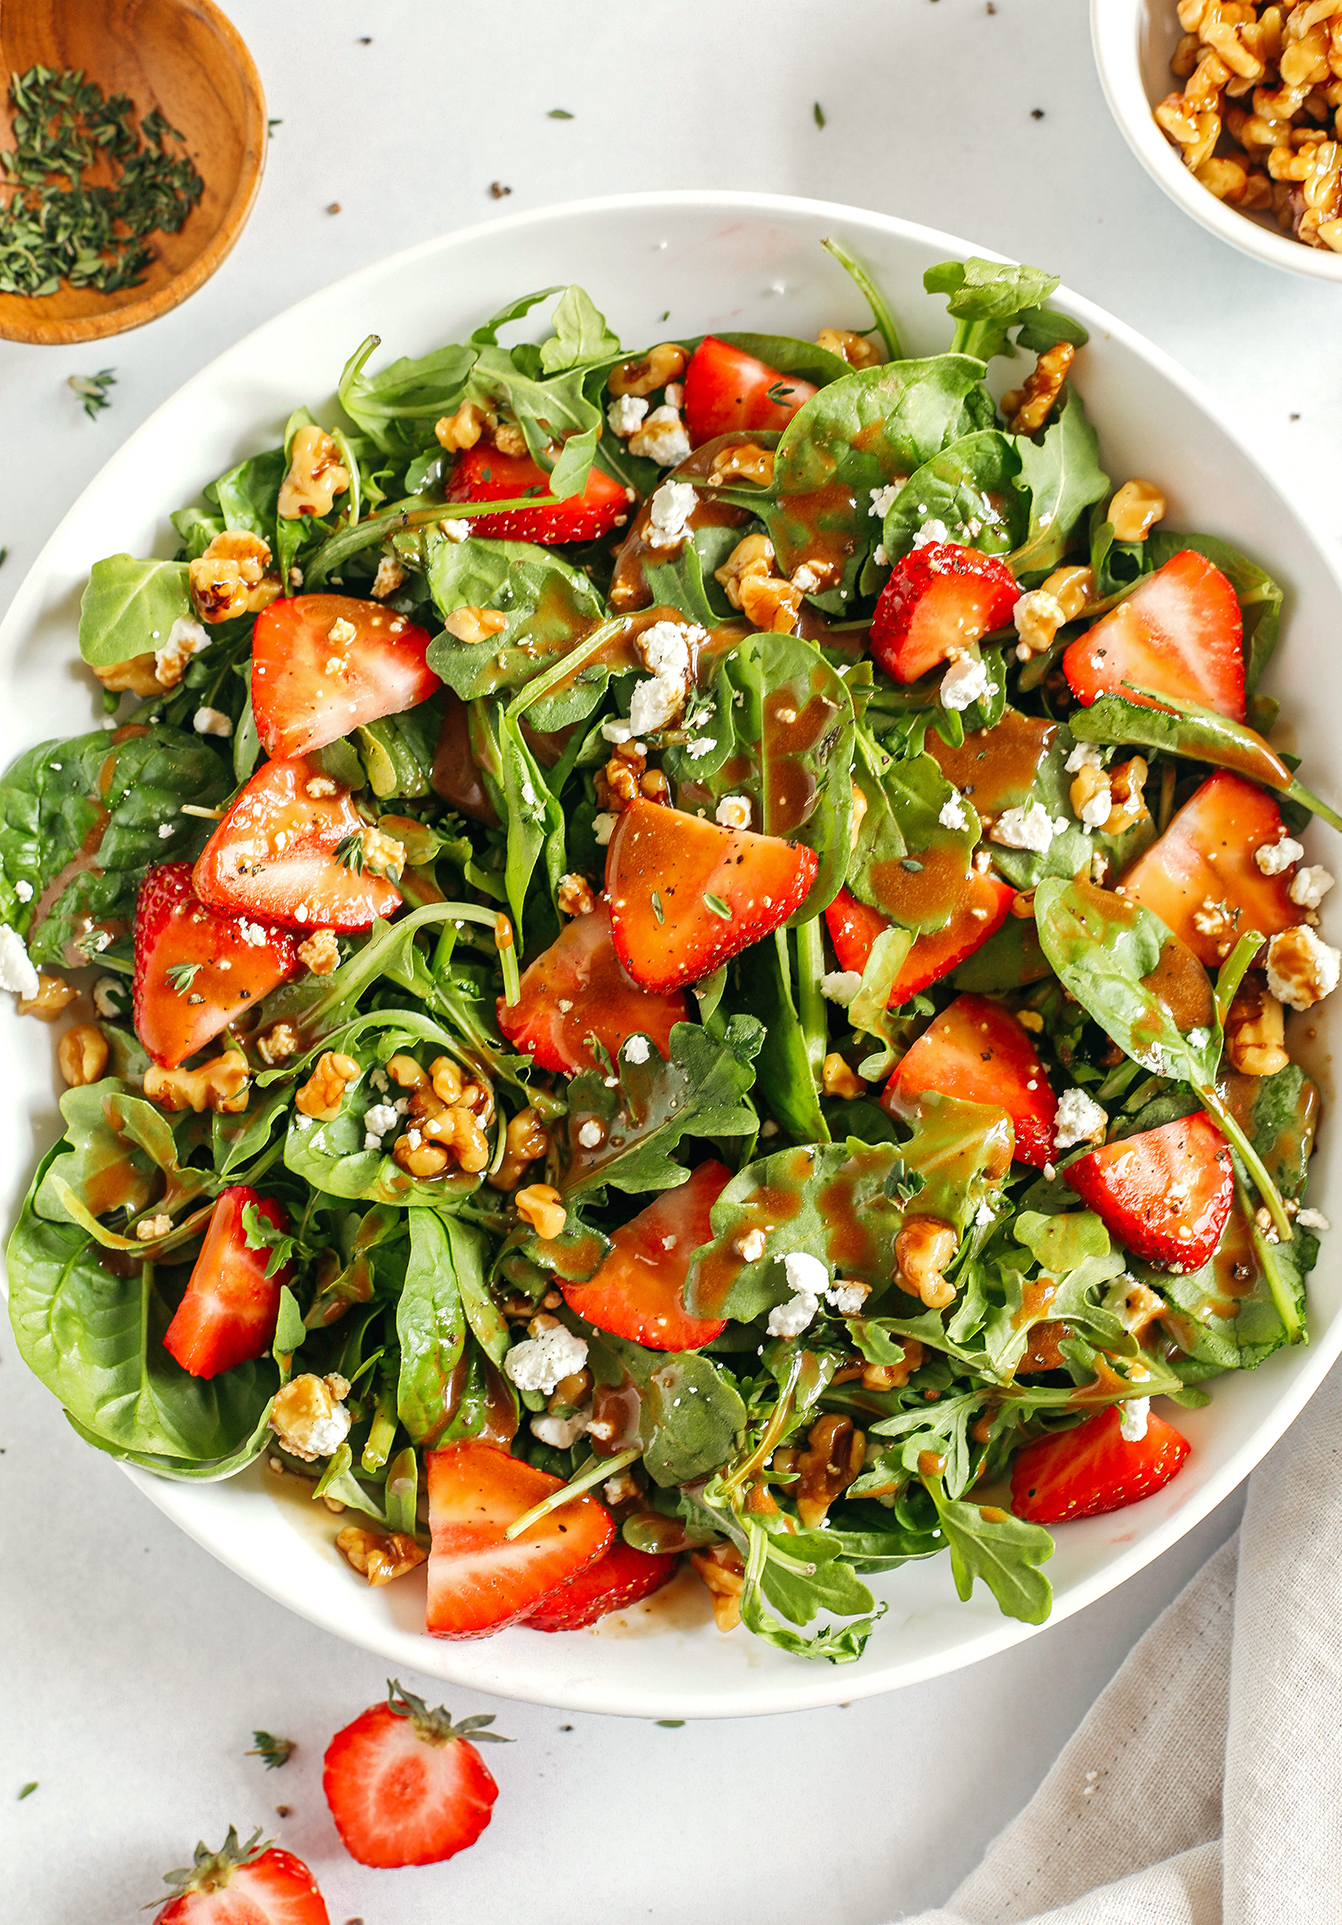 My favorite Strawberry Salad made with leafy greens, fresh strawberries, candied walnuts, and creamy goat cheese all tossed with a rich and tangy maple balsamic dressing!